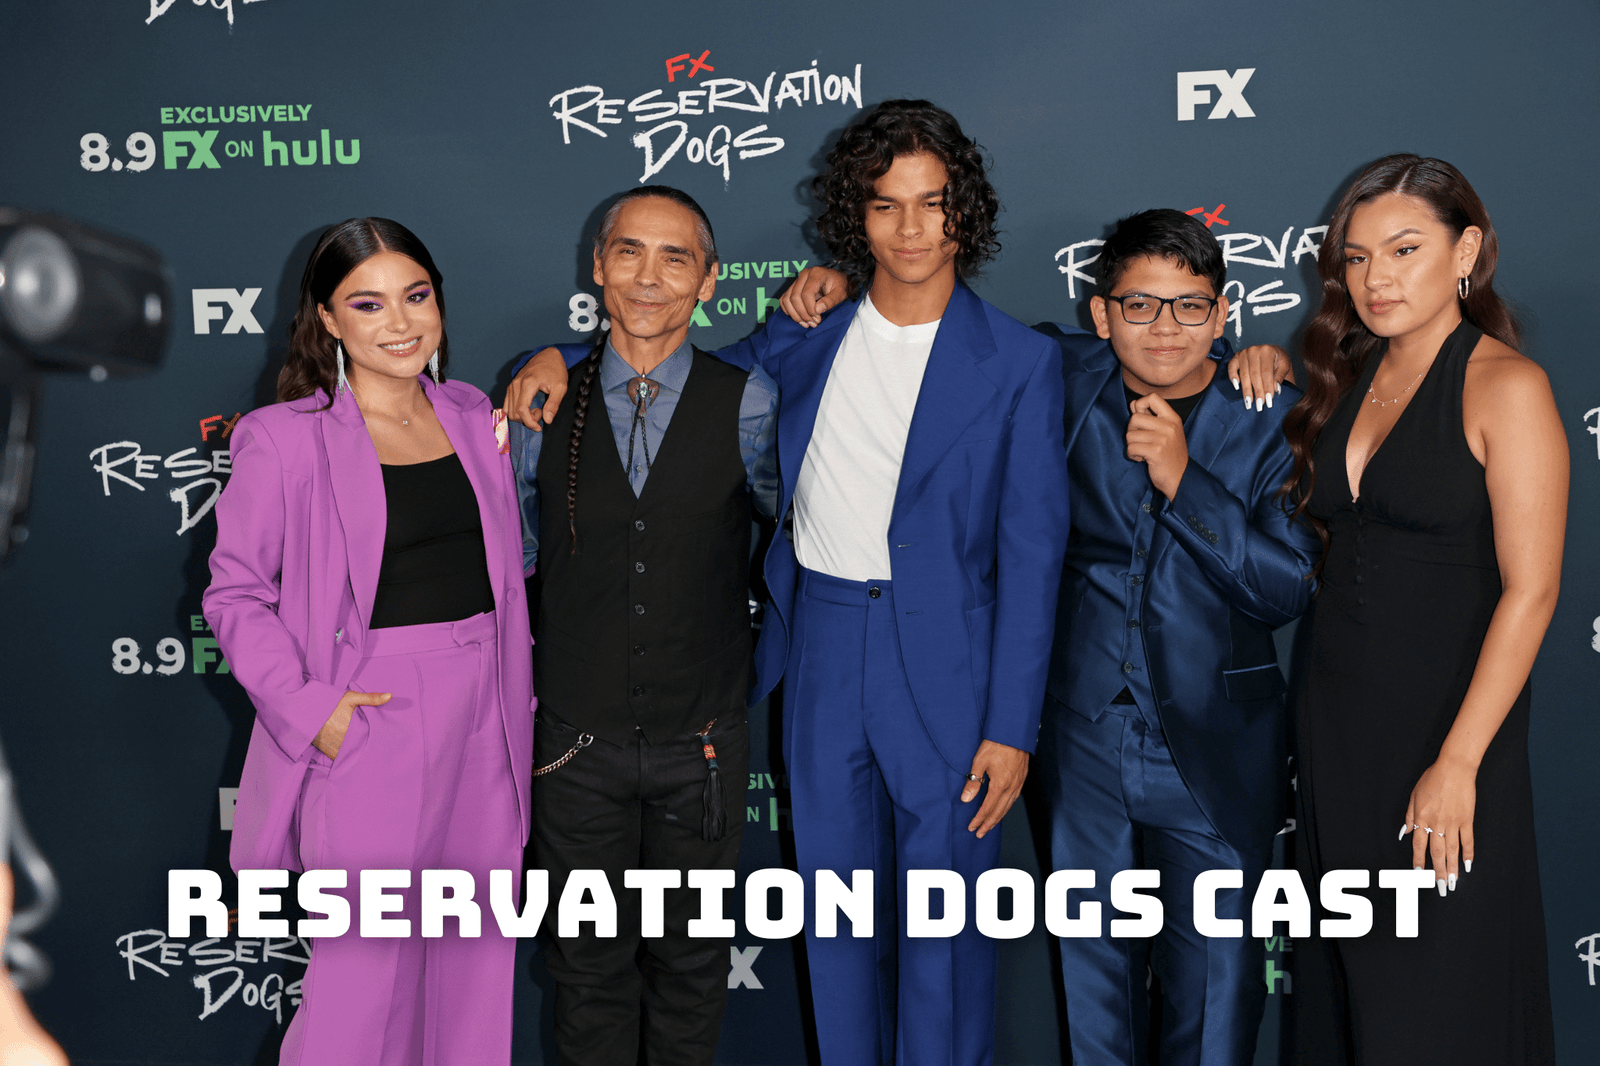 Reservation Dogs Cast - Ages, Partners, Characters